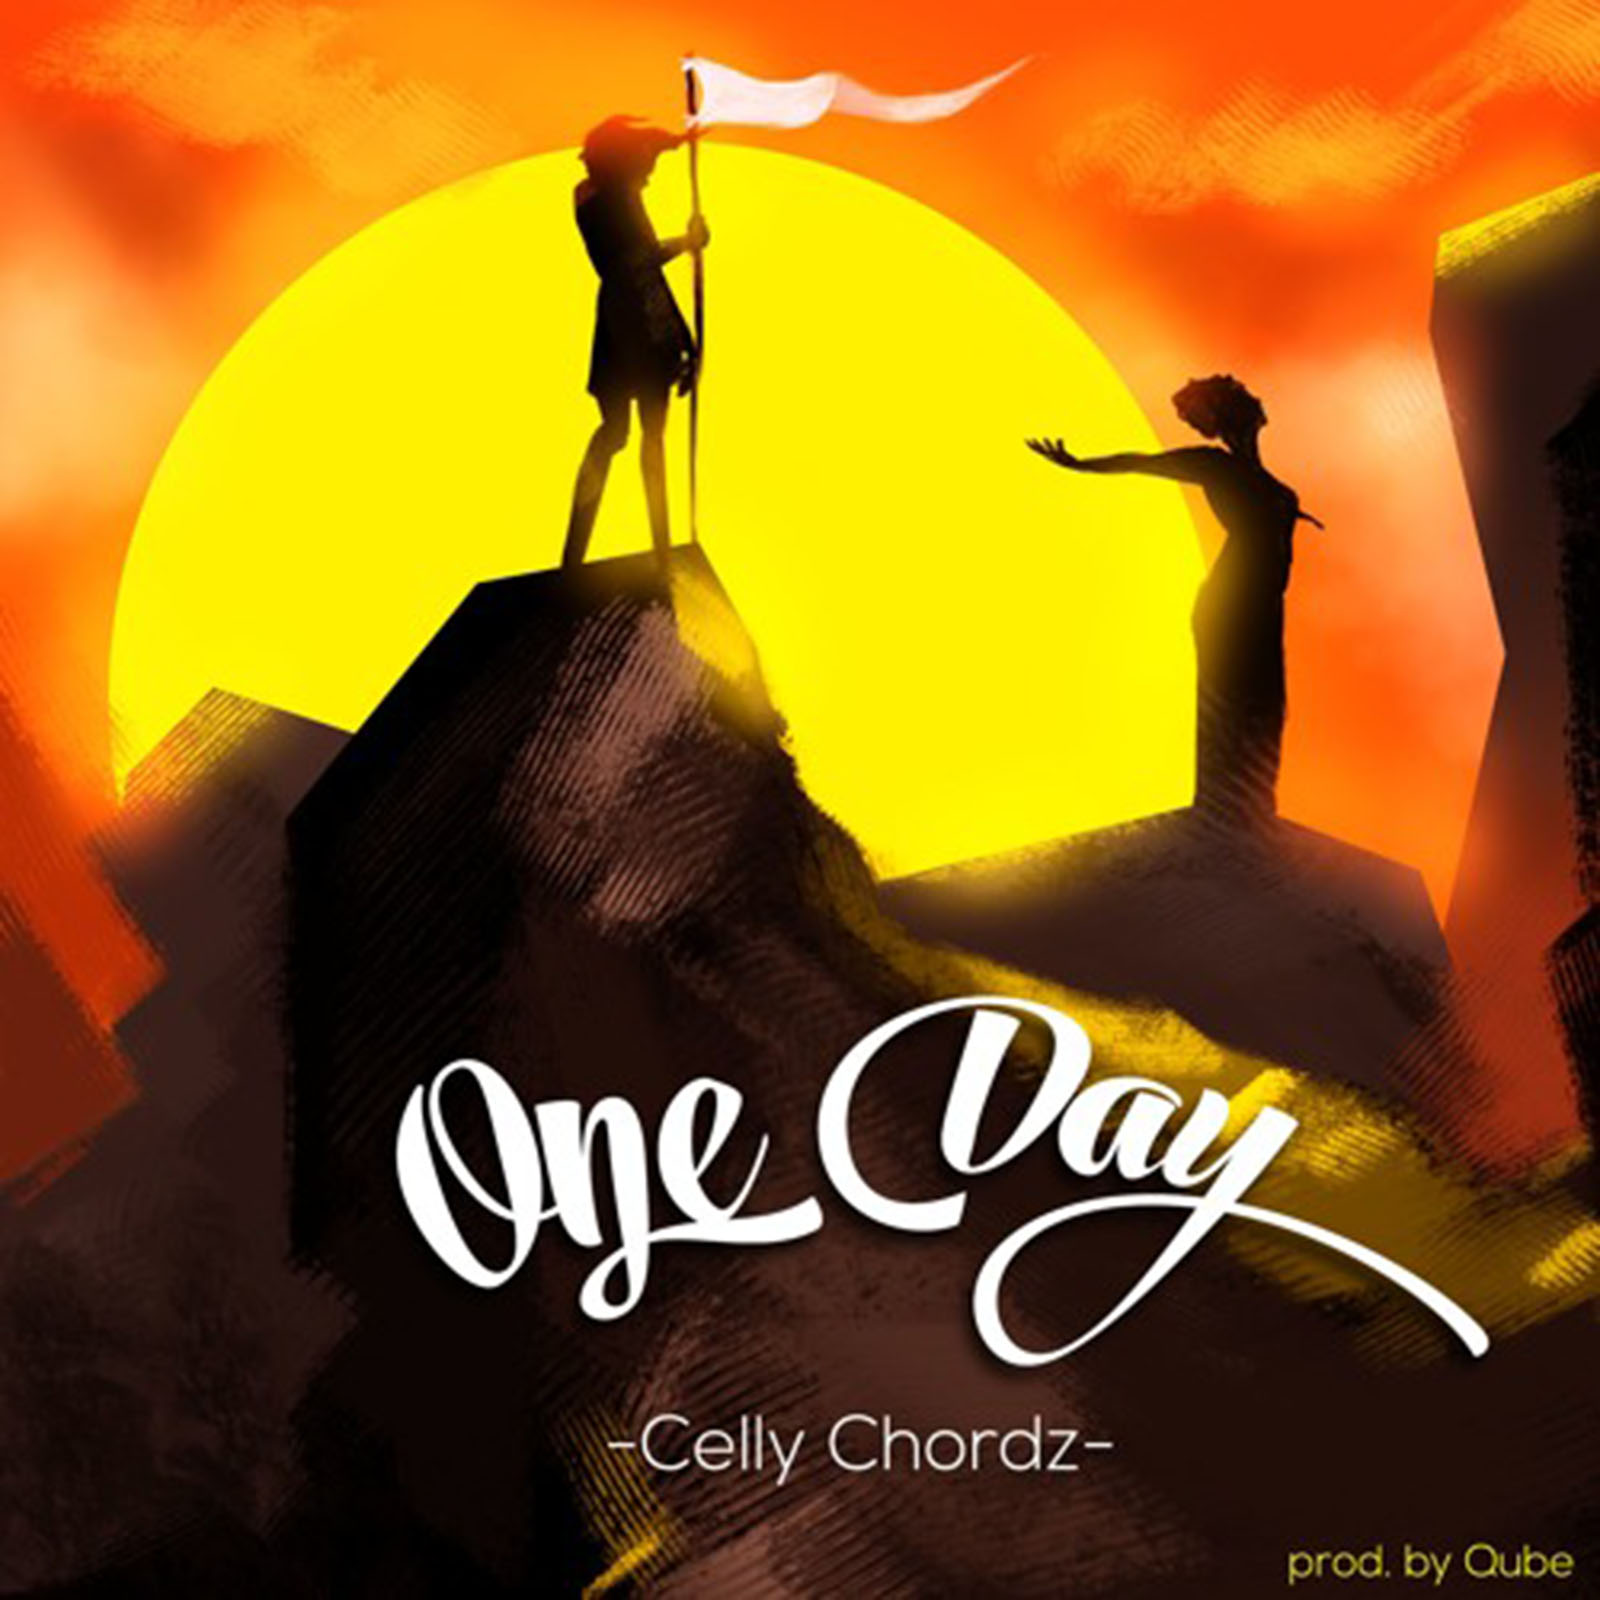 One Day by Celly Chordz